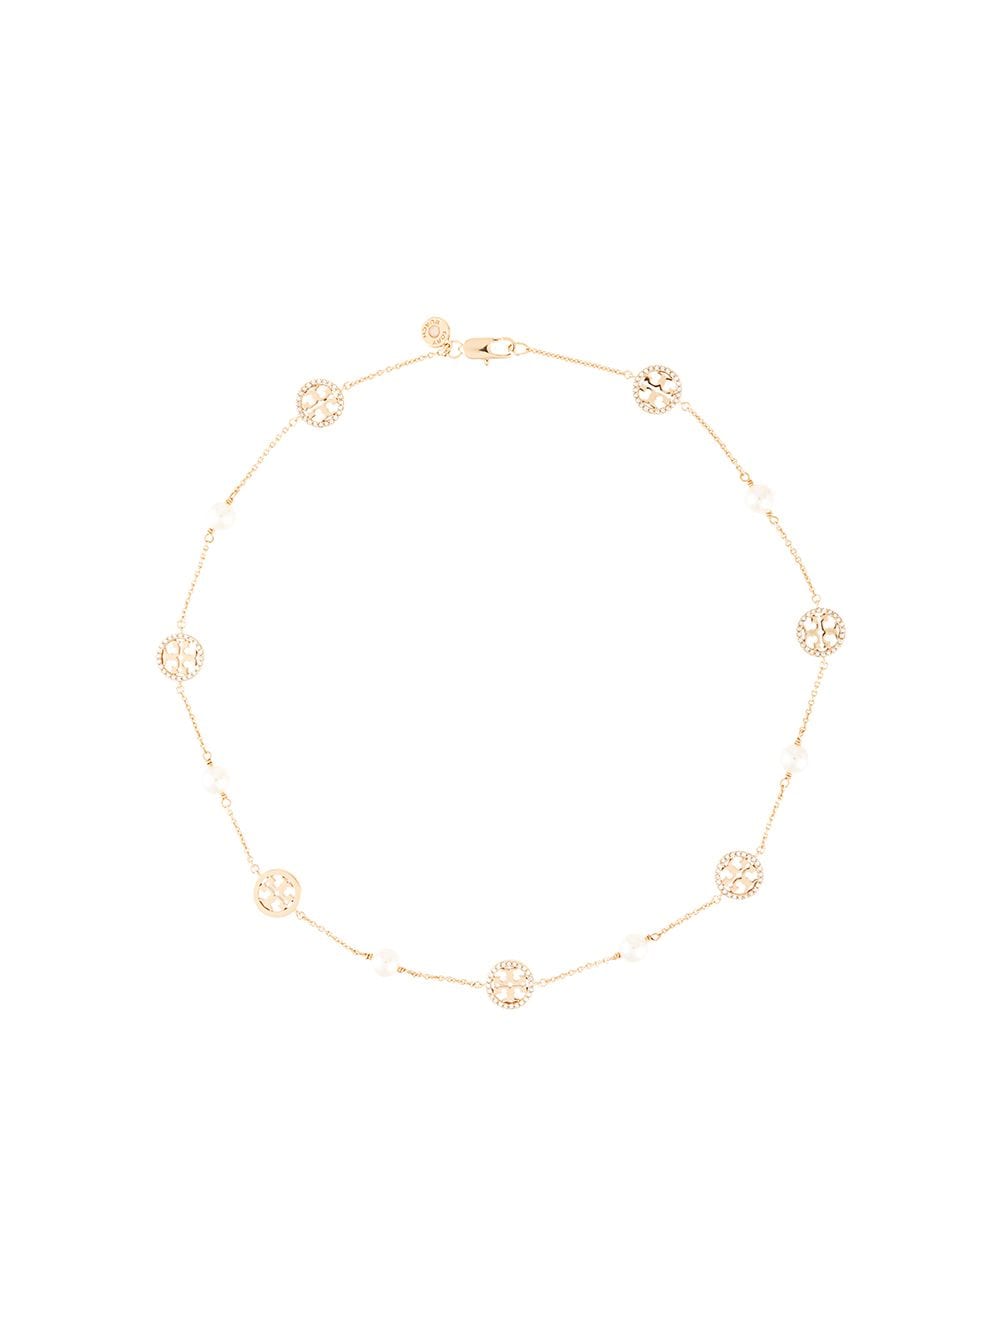 TORY BURCH CRYSTAL PEARL DELICATE LOGO NECKLACE